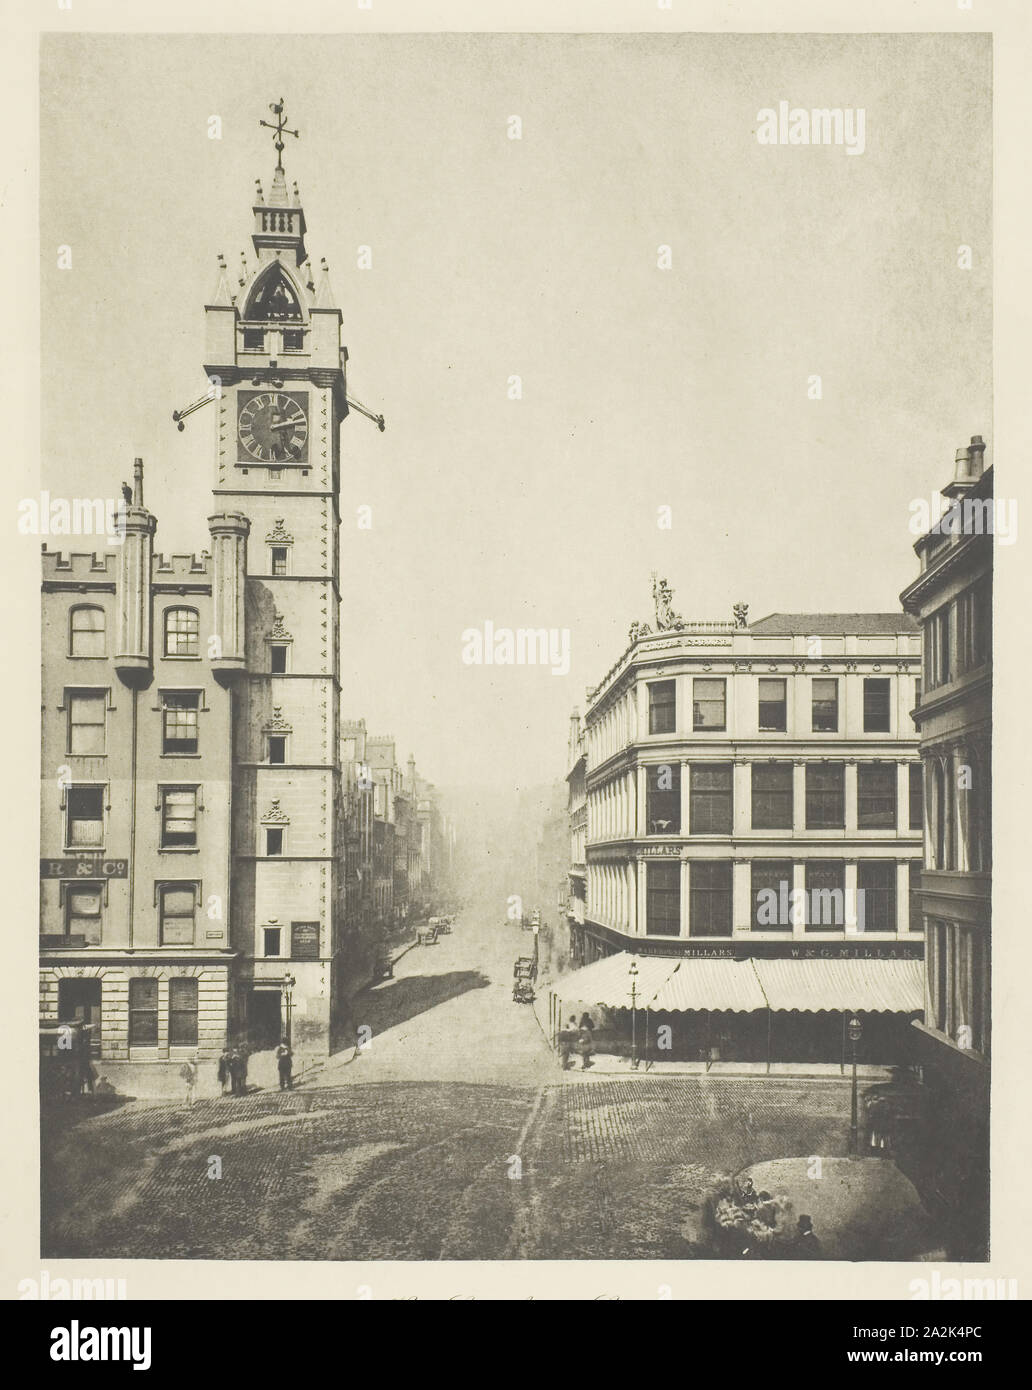 High Street from the Cross, 1868, Thomas Annan, Scottish, 1829–1887, Scotland, Photogravure, plate 1 from the book 'The Old Closes & Streets of Glasgow' (1900), 23.2 x 18 cm (image), 38.1 x 27.3 cm (paper Stock Photo